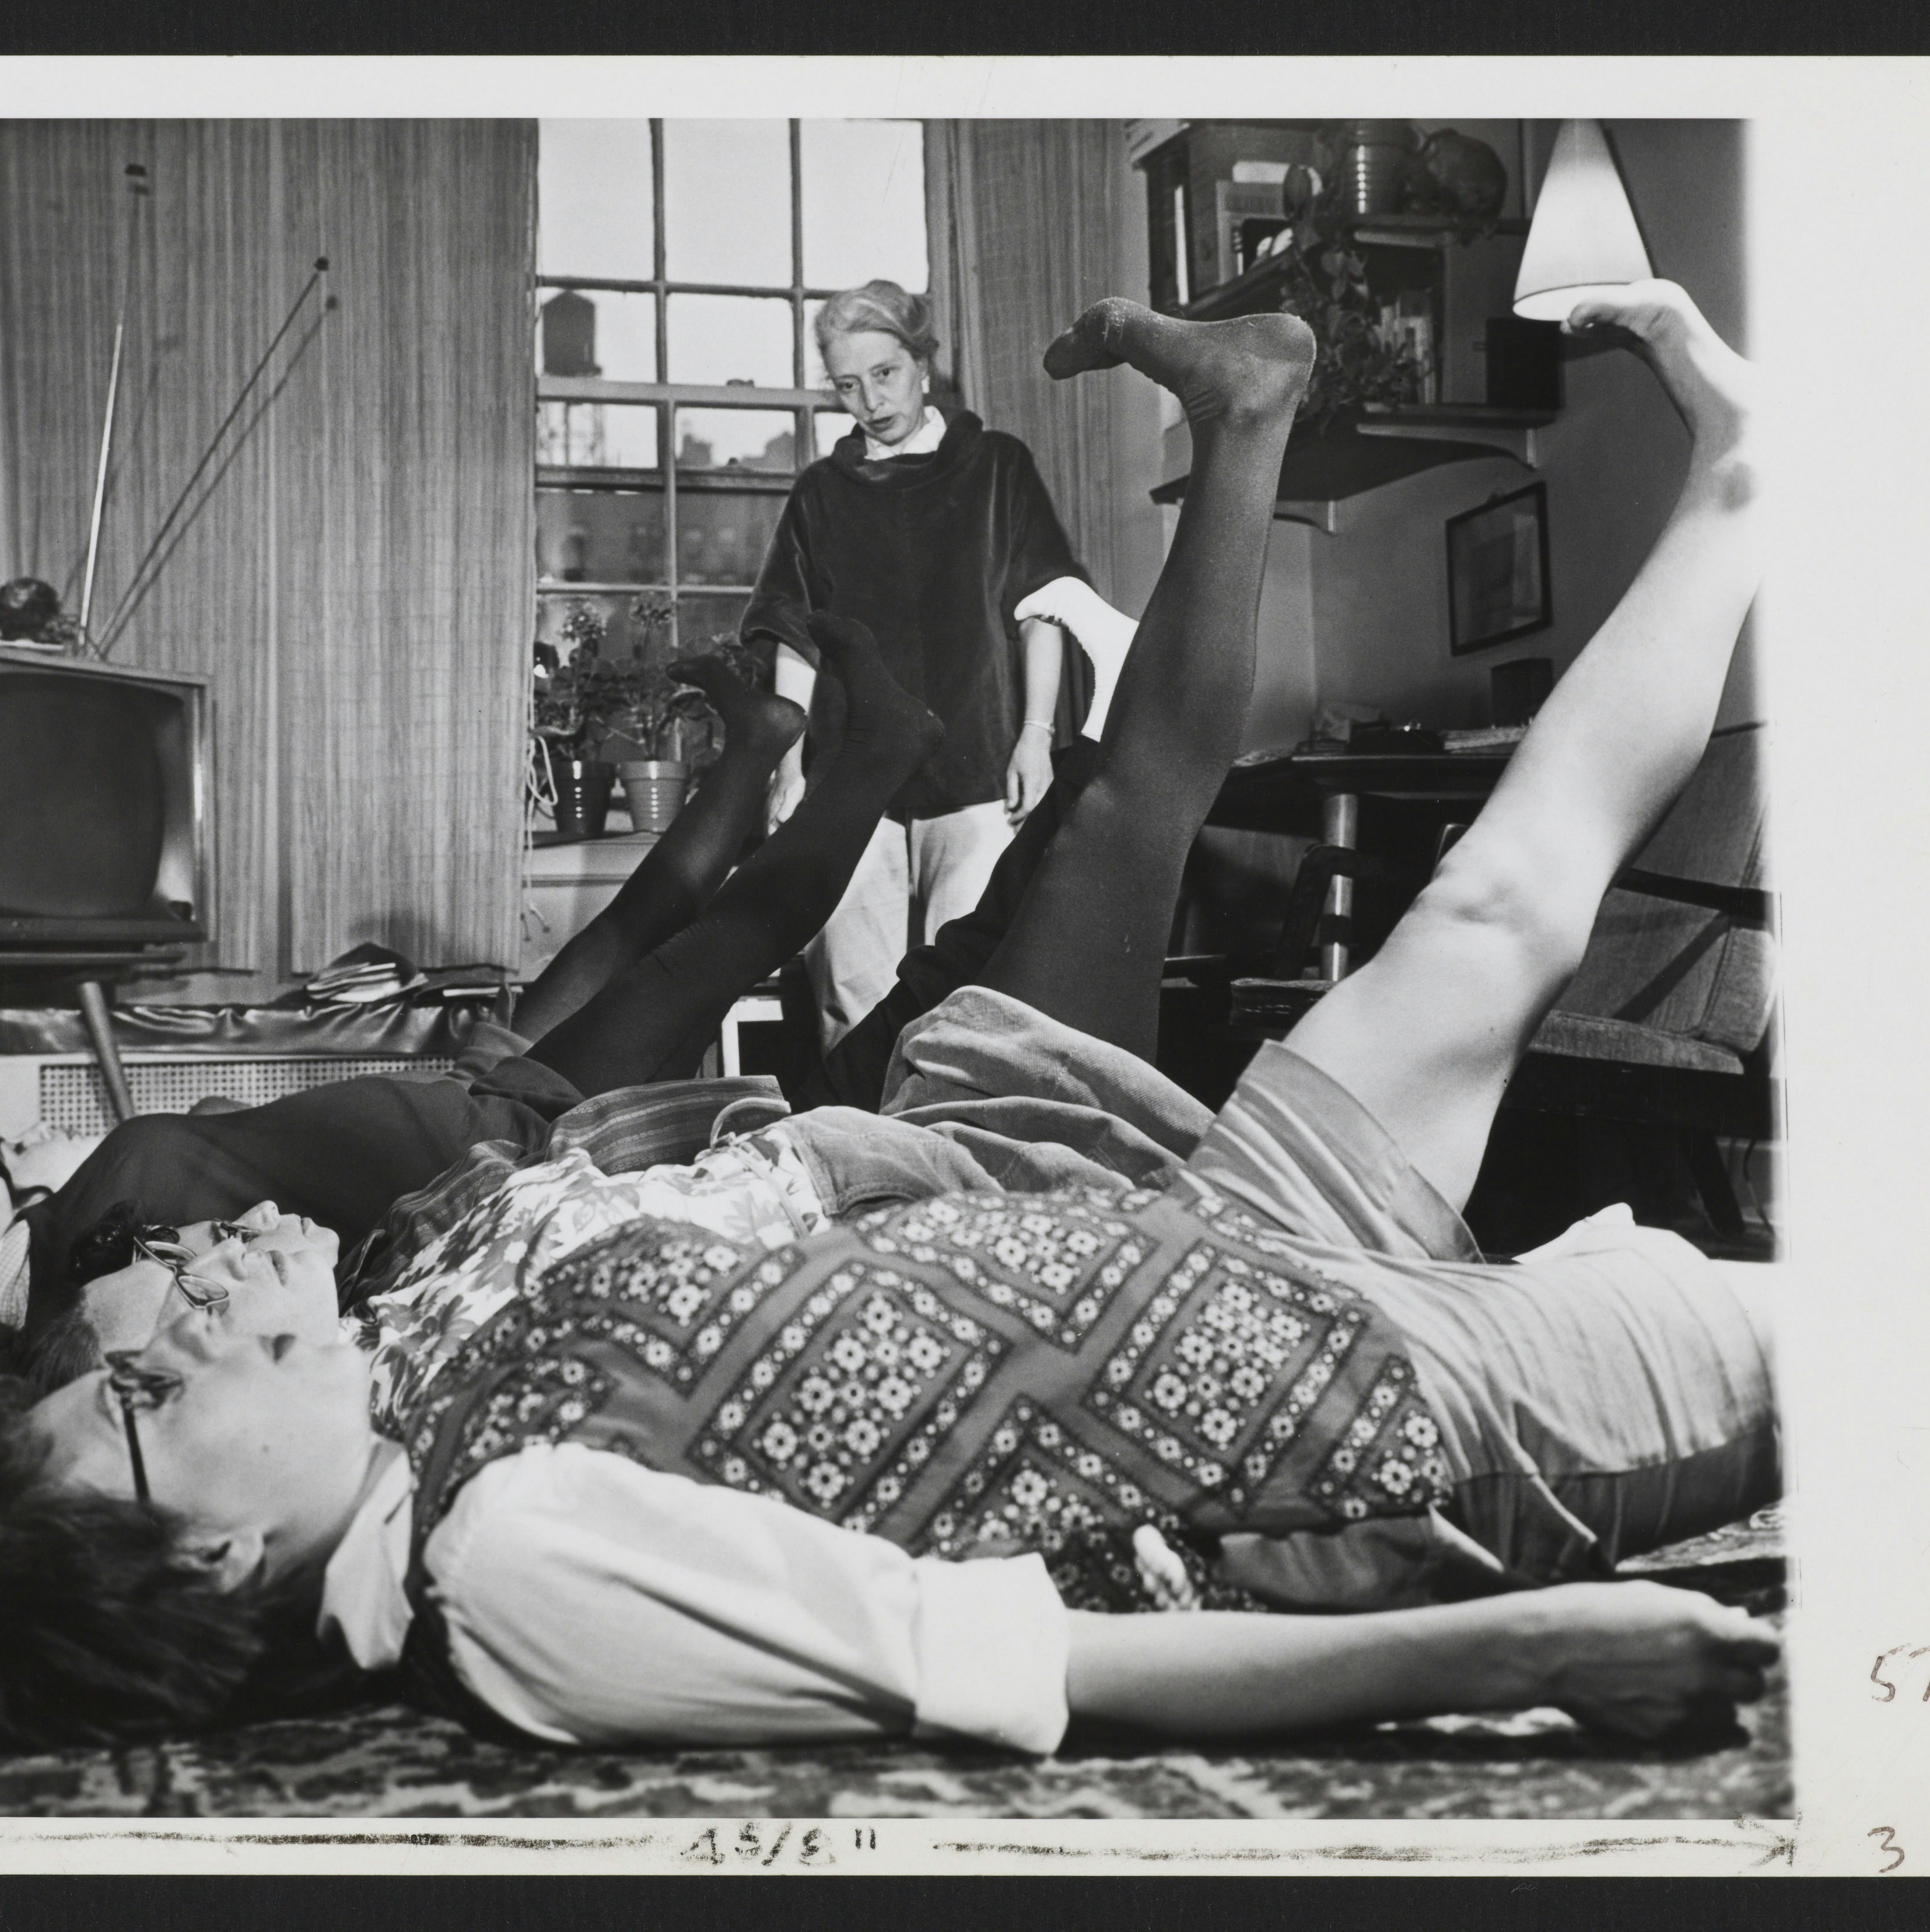 Elisabeth Bing and her students during a Lamaze class, performing an exercise